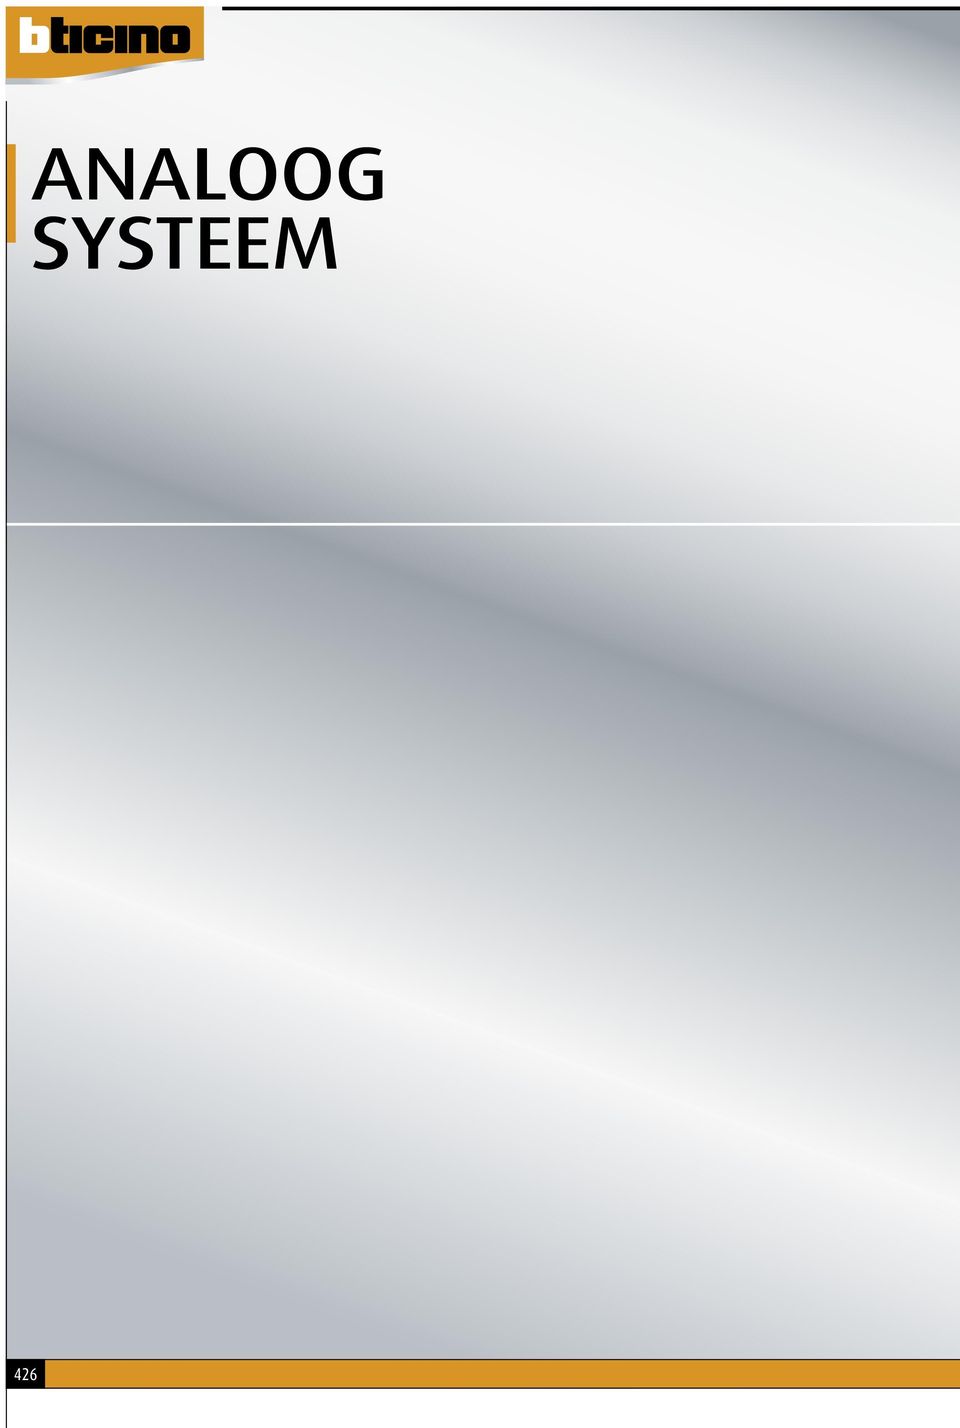 systeem